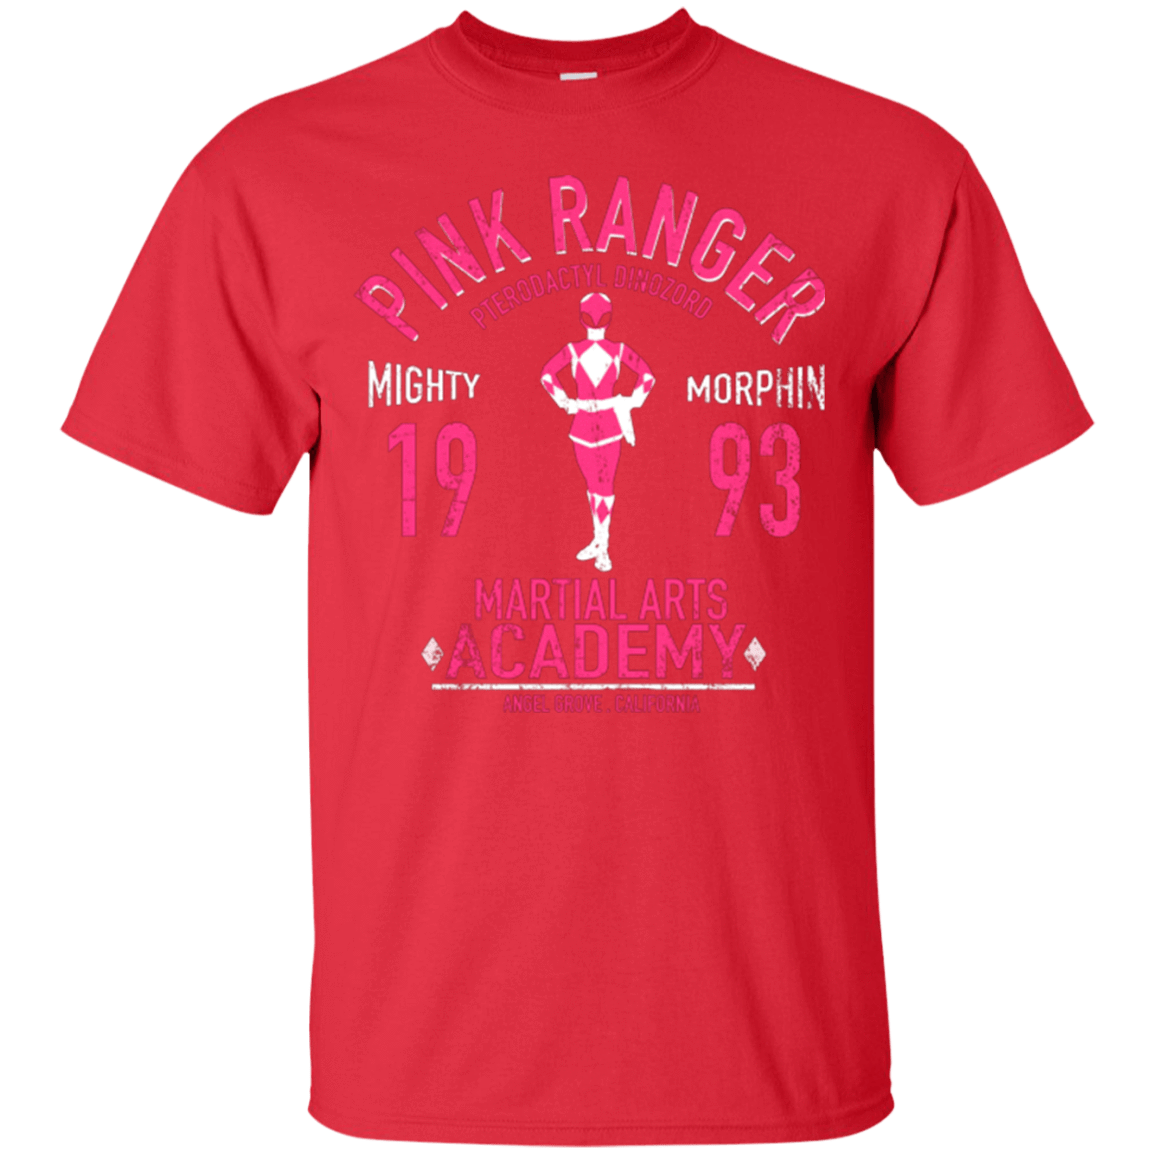 T-Shirts Red / Small Pterodactyl Ranger T-Shirt